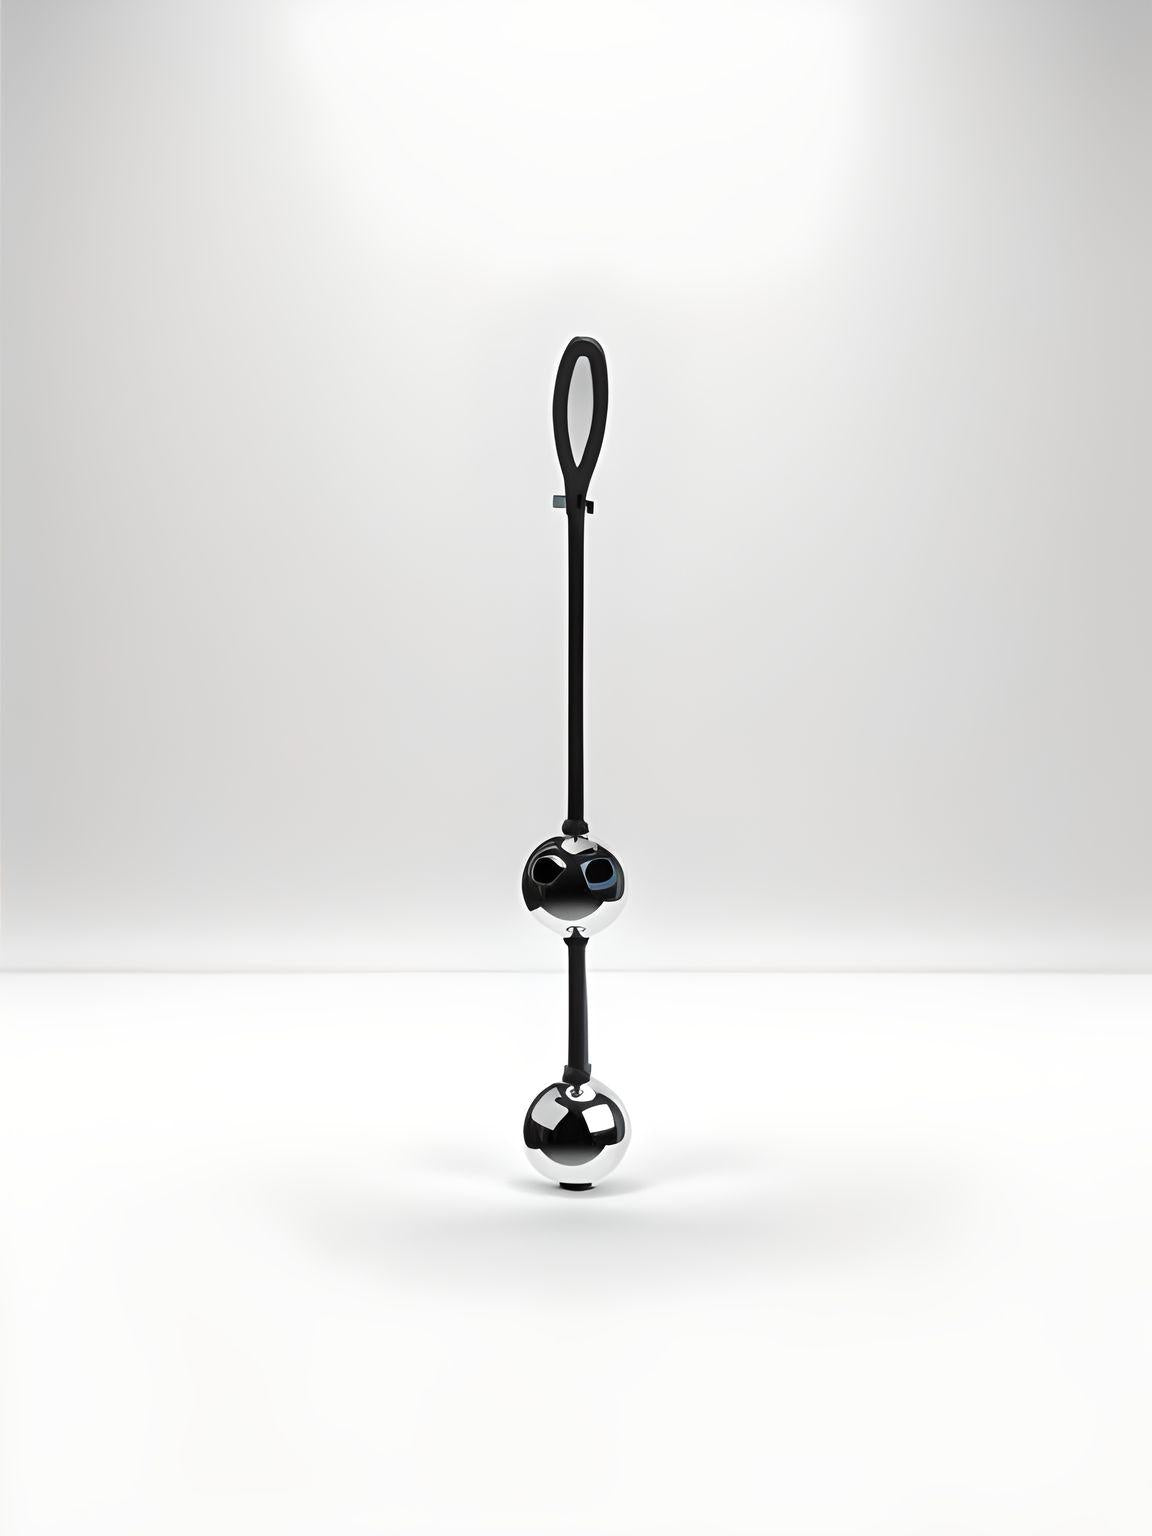 a black pole with a black ball on top of it